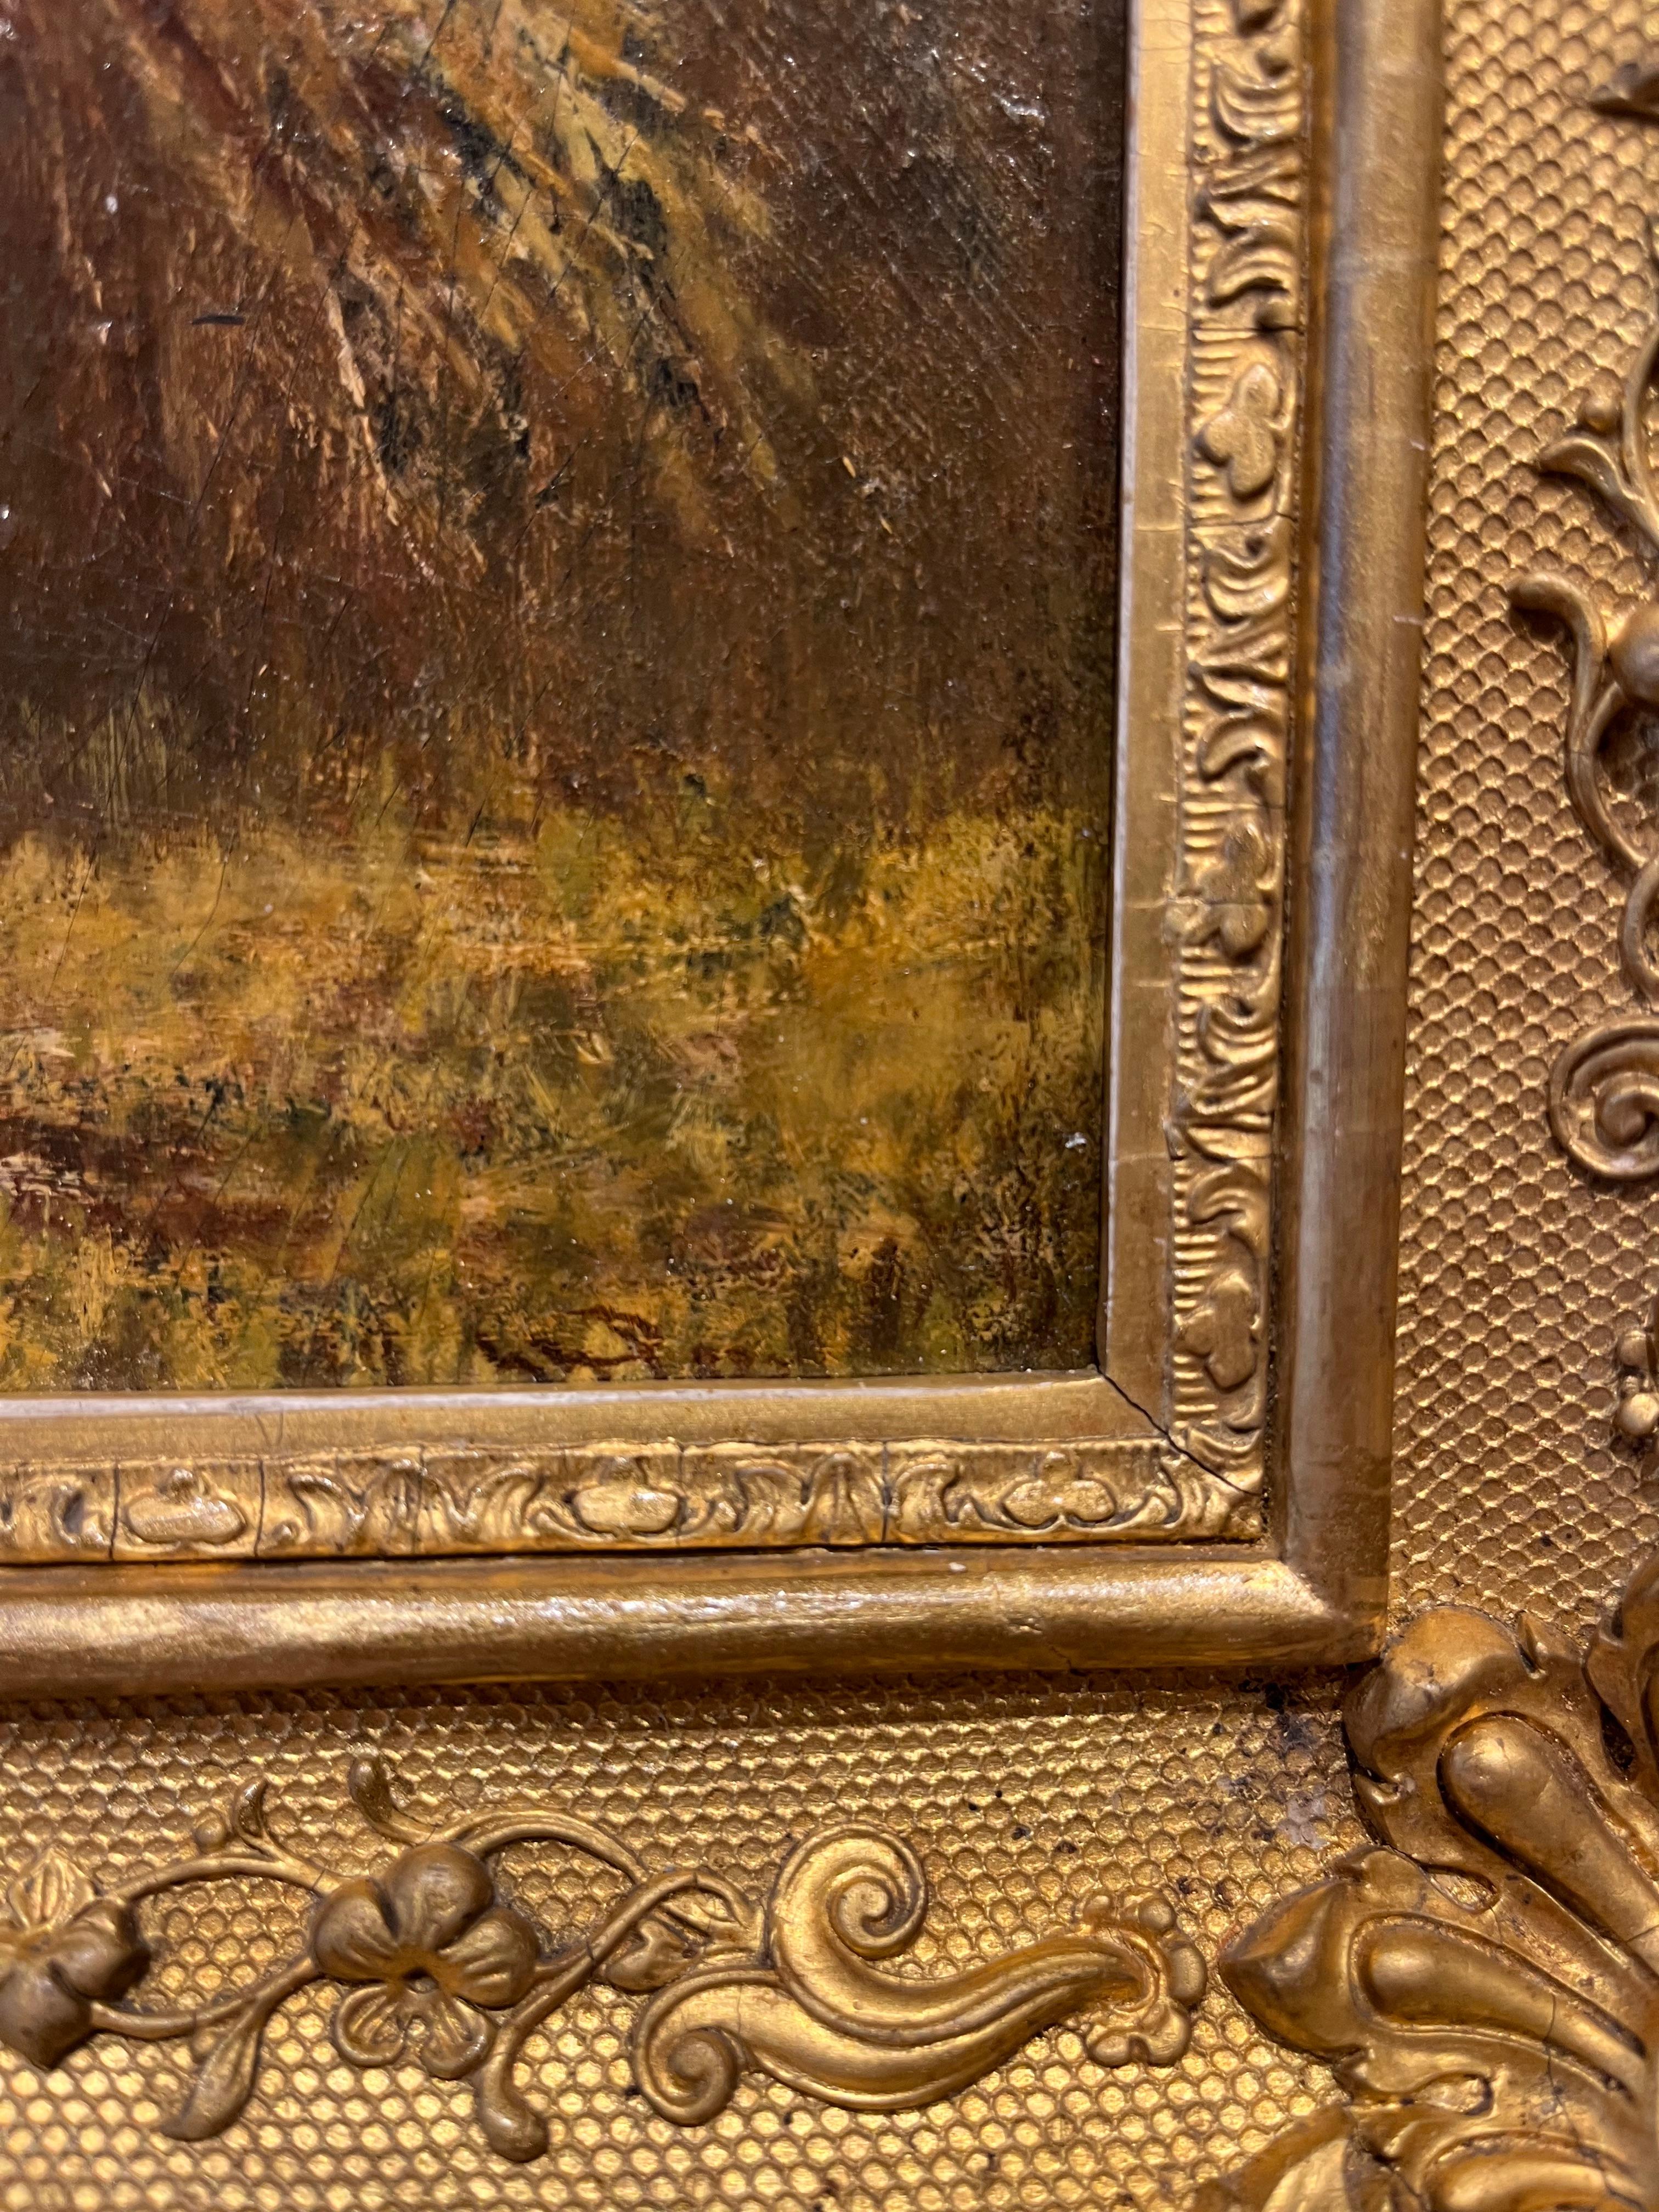 This painting is in excellent condition and signed lower right. William Hicok Low first trained with the sculptor Erastus Dow Palmer. When he was 17, he worked in New York City as an illustrator and years later traveled to Paris to study with